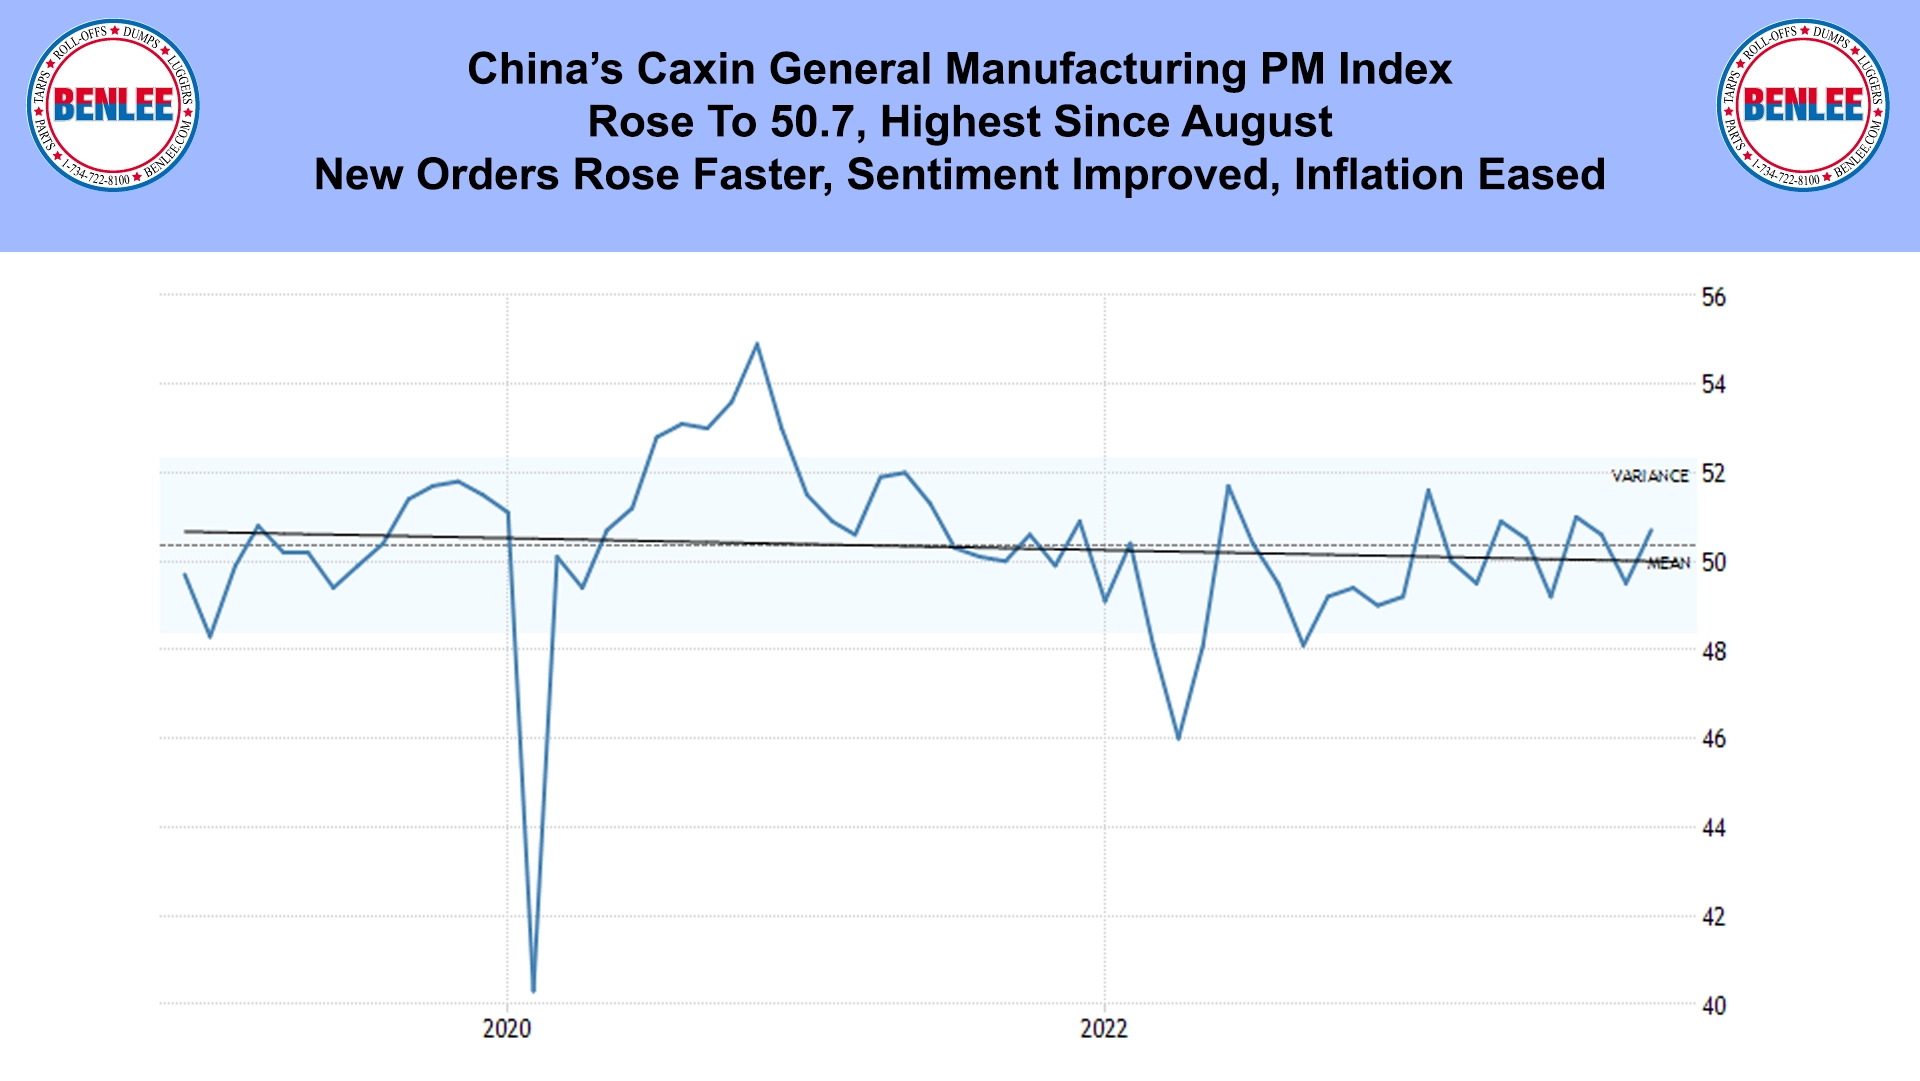 China’s Caxin General Manufacturing PM Index